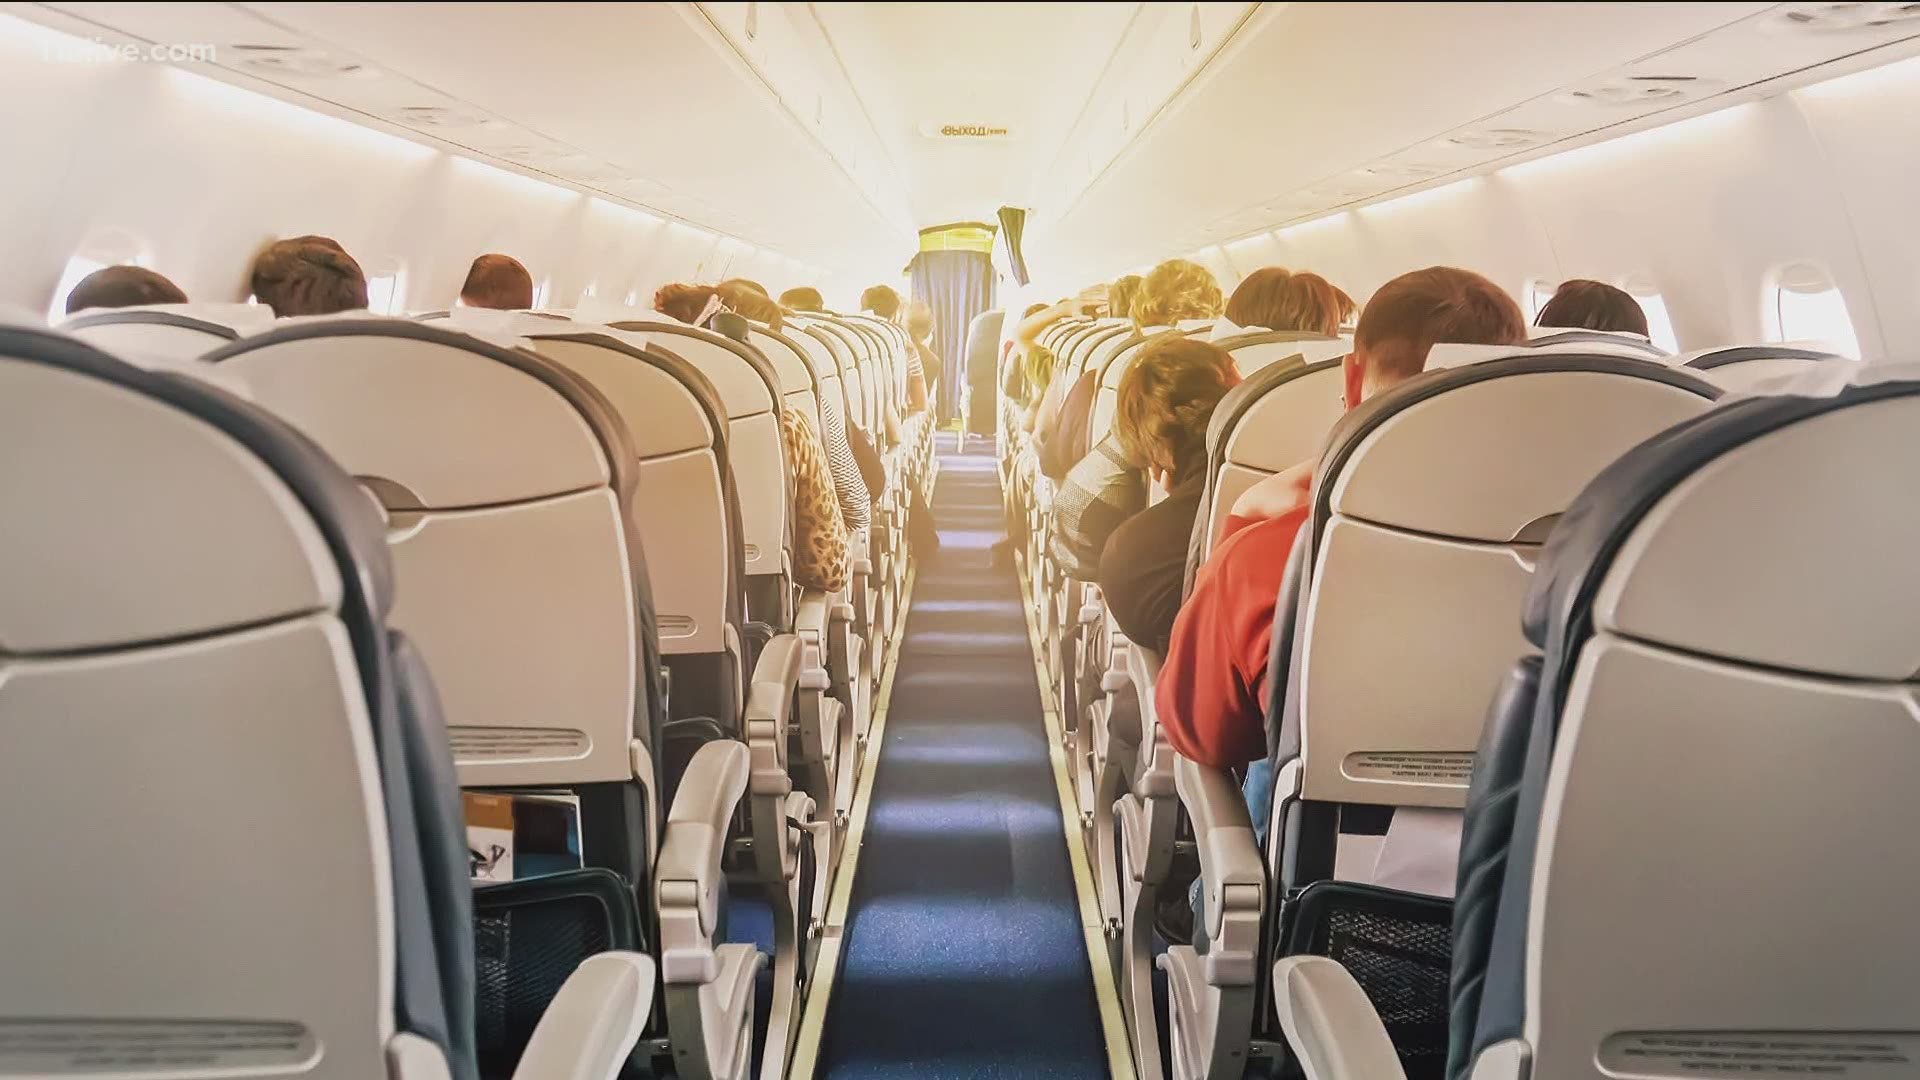 Are middle seats being left open? Do airlines require masks? We break it down.